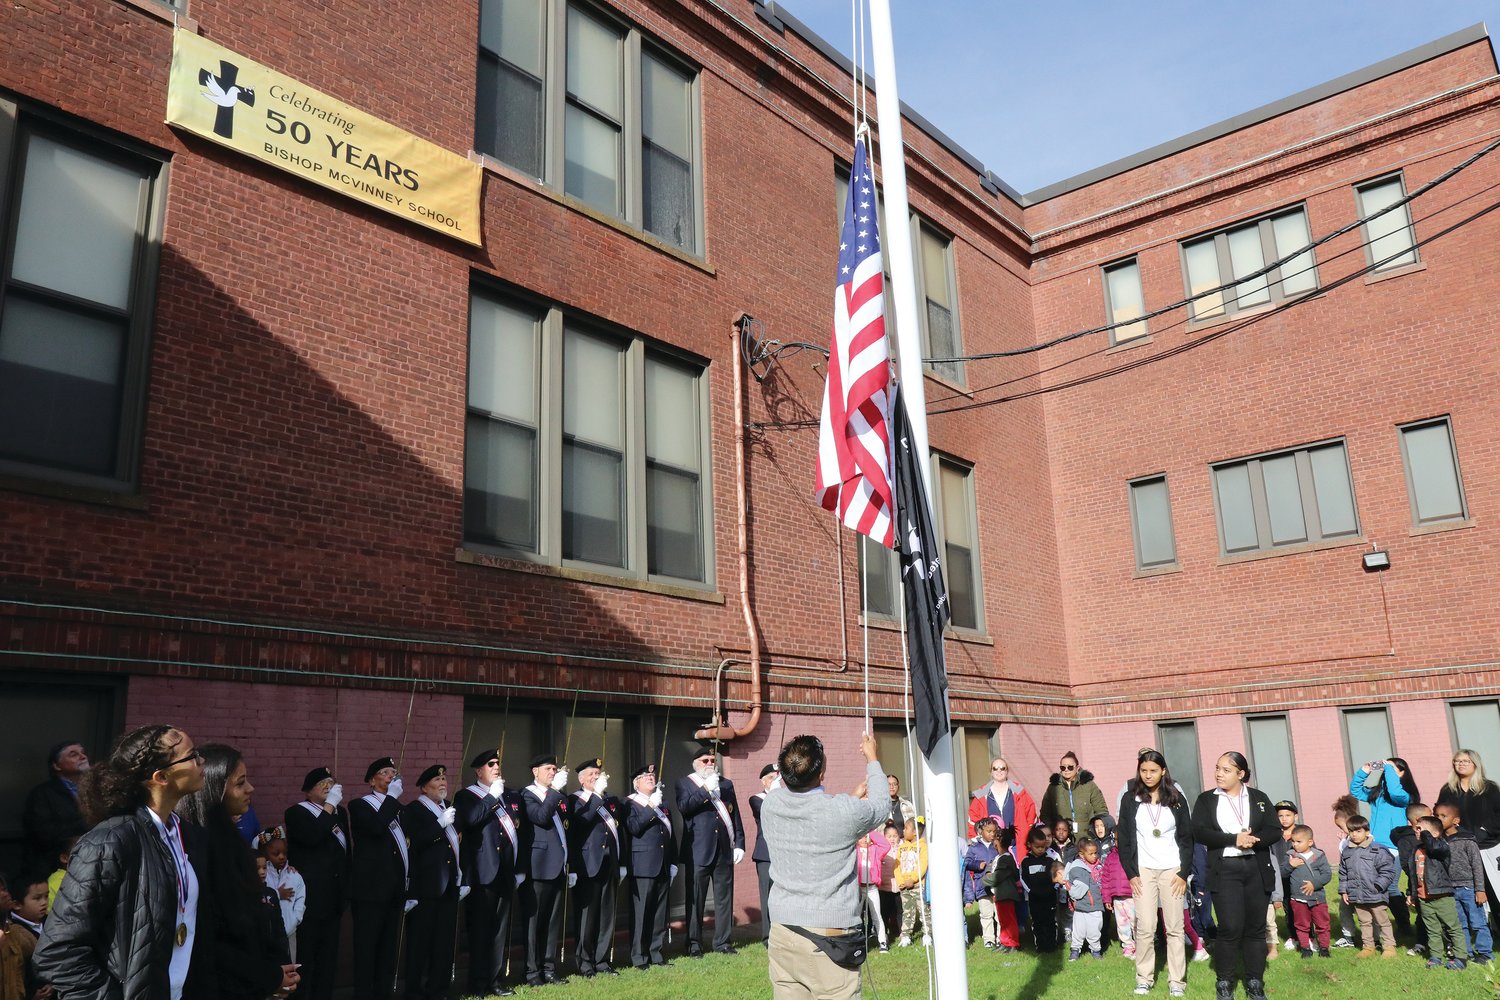 In the 97 years since the red brick school building that’s housed both St. Michael School, and now Bishop McVinney School for the past 50 years, there was never a flagpole on grounds. The Knights of Columbus stepped in to change that history, raising the $2,500 needed to install a flagpole on the lawn.